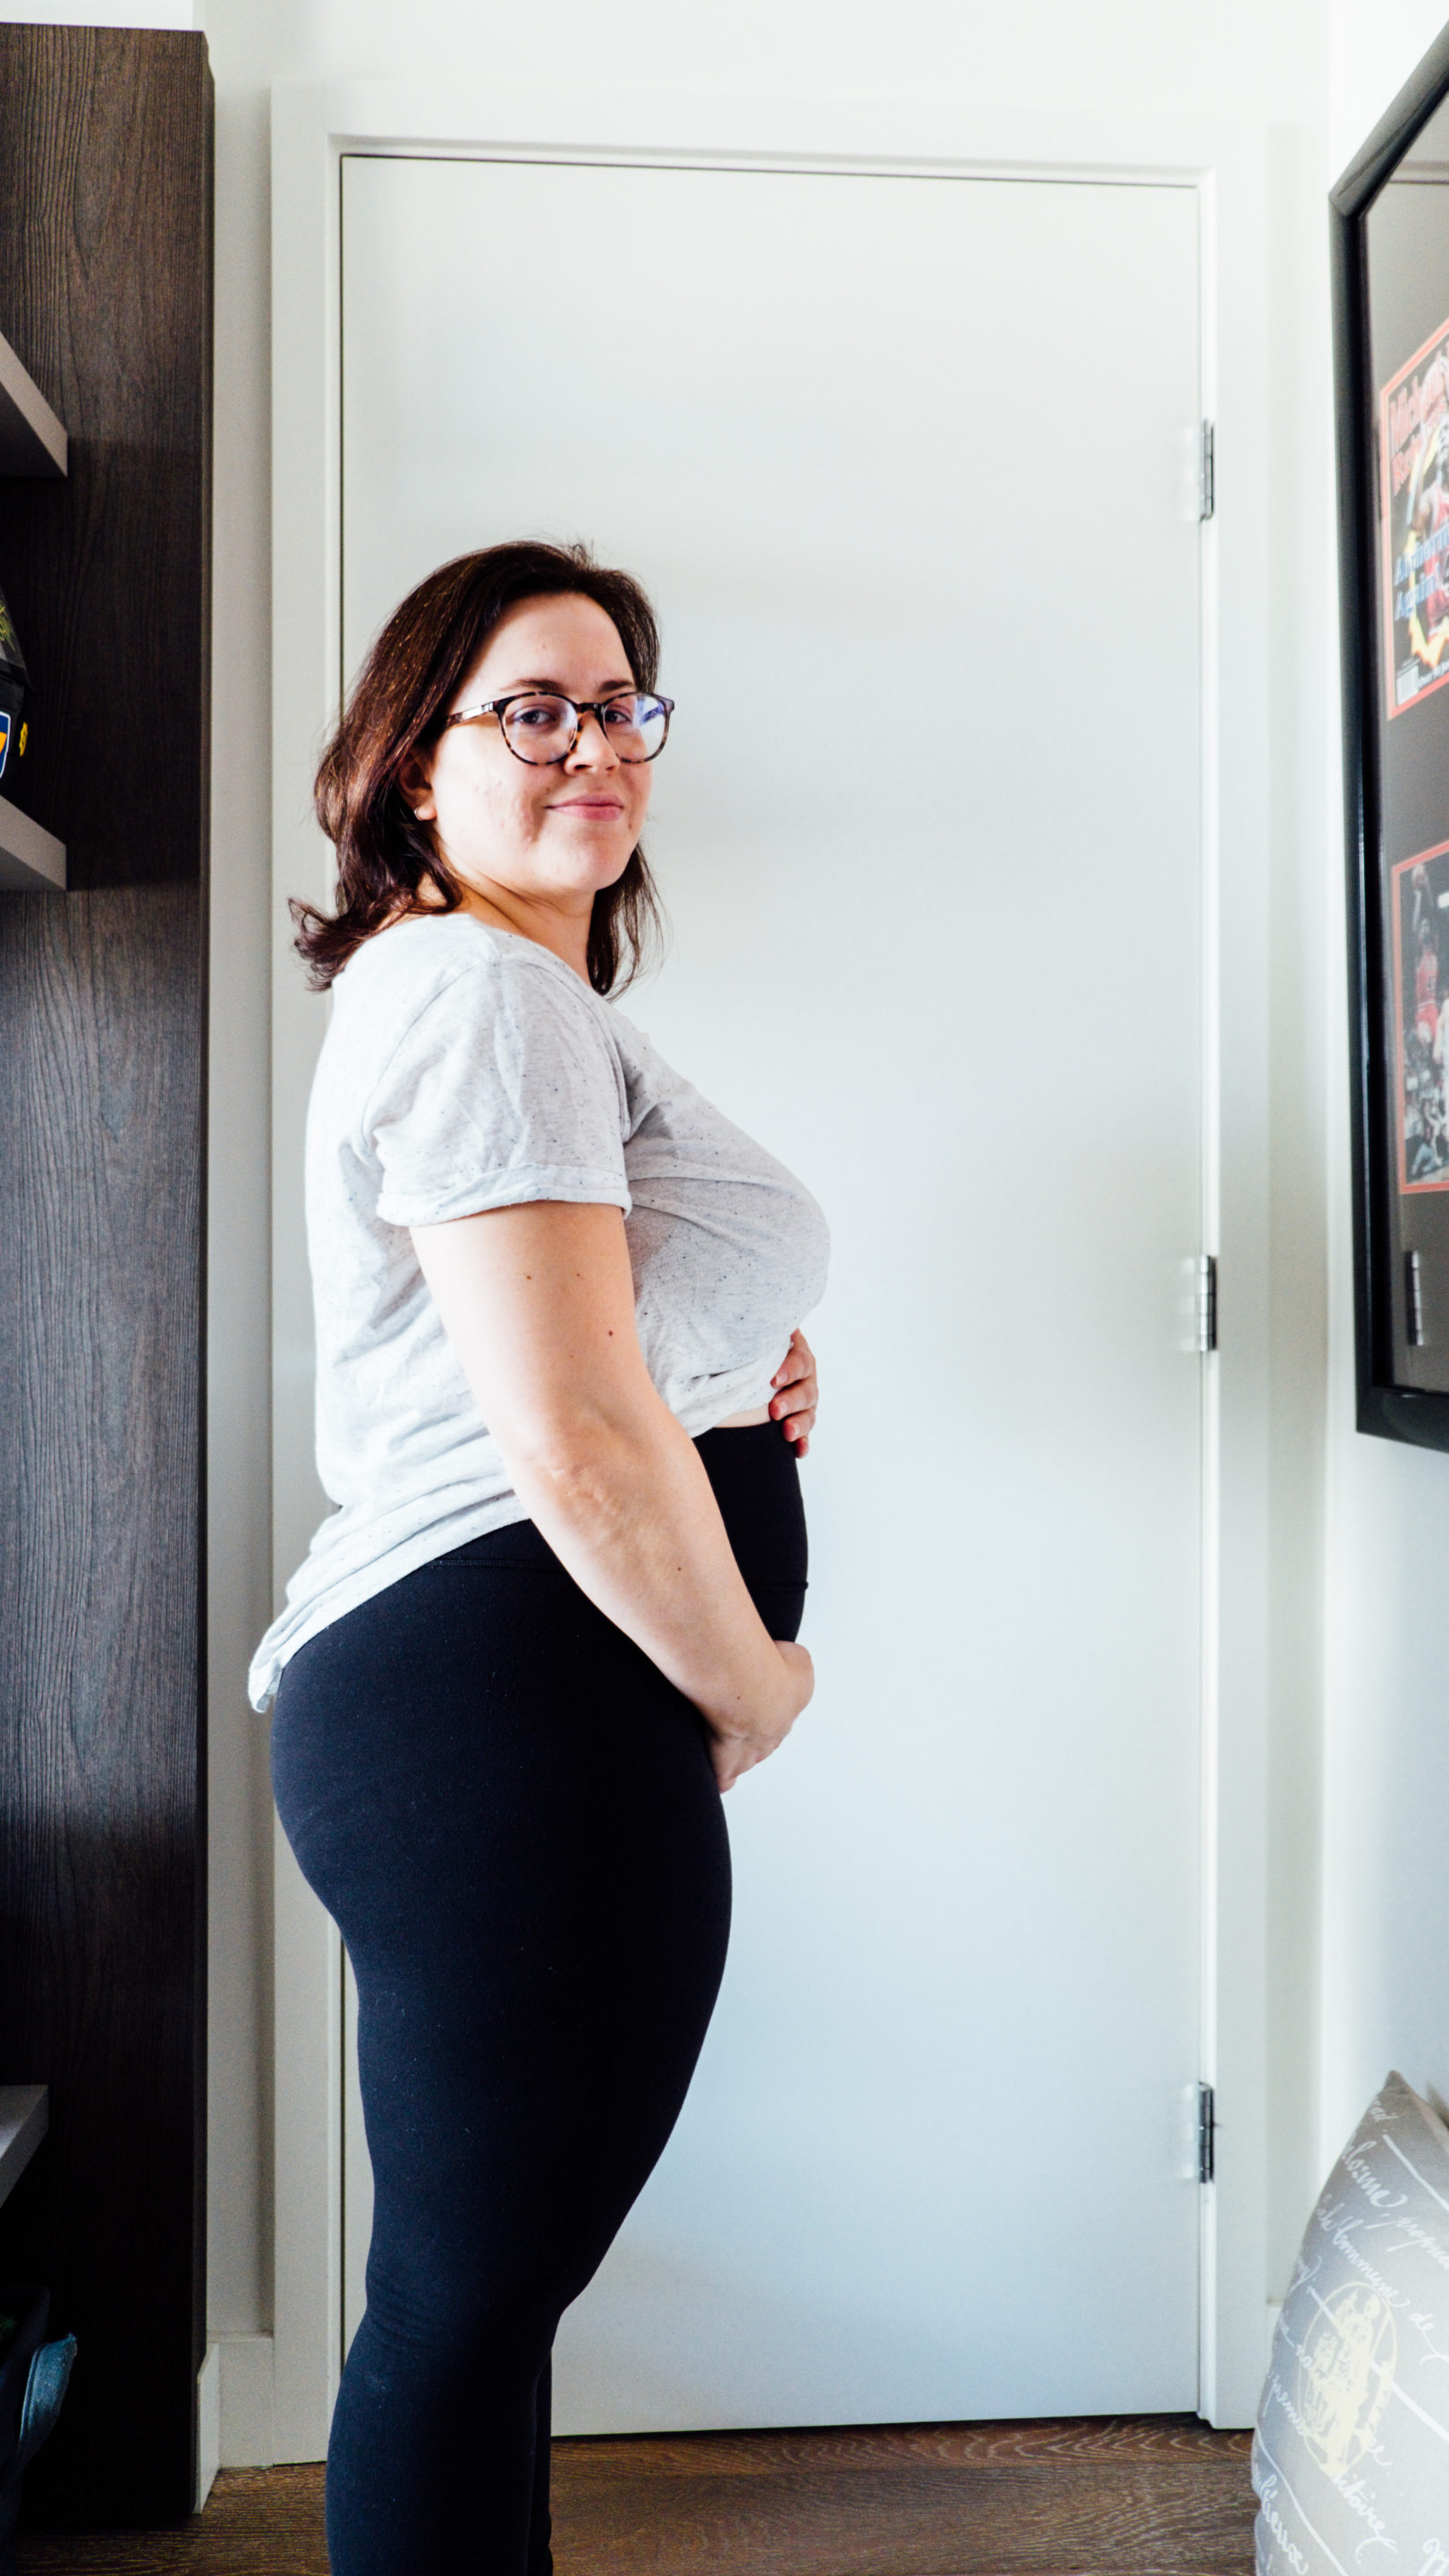 20 Weeks Pregnant: Cravings and Updates